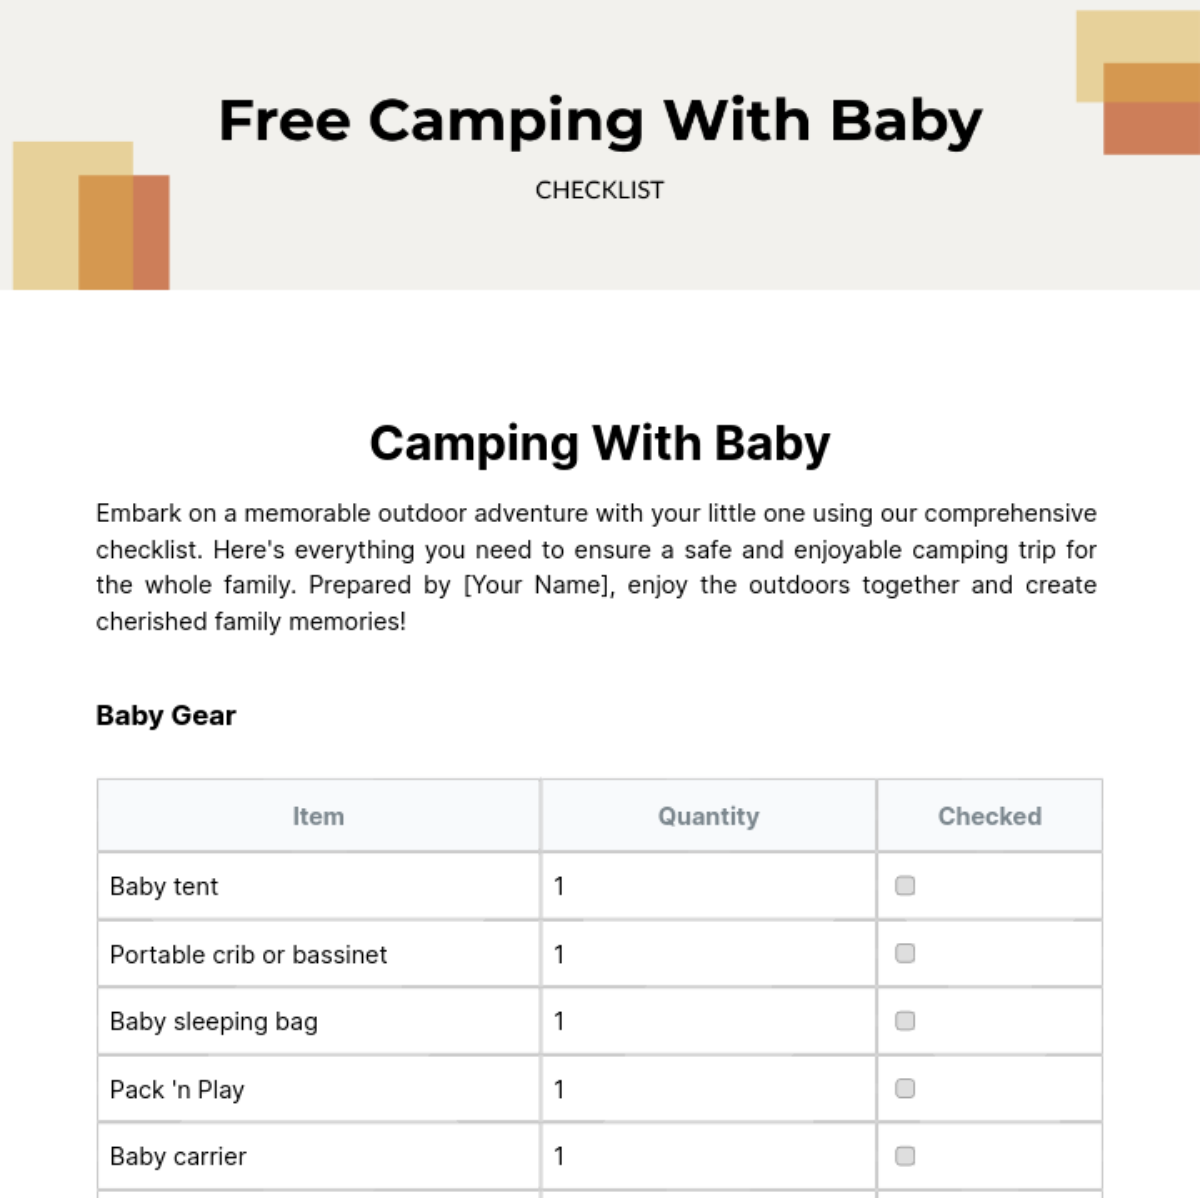 Free Camping With Baby Checklist Template